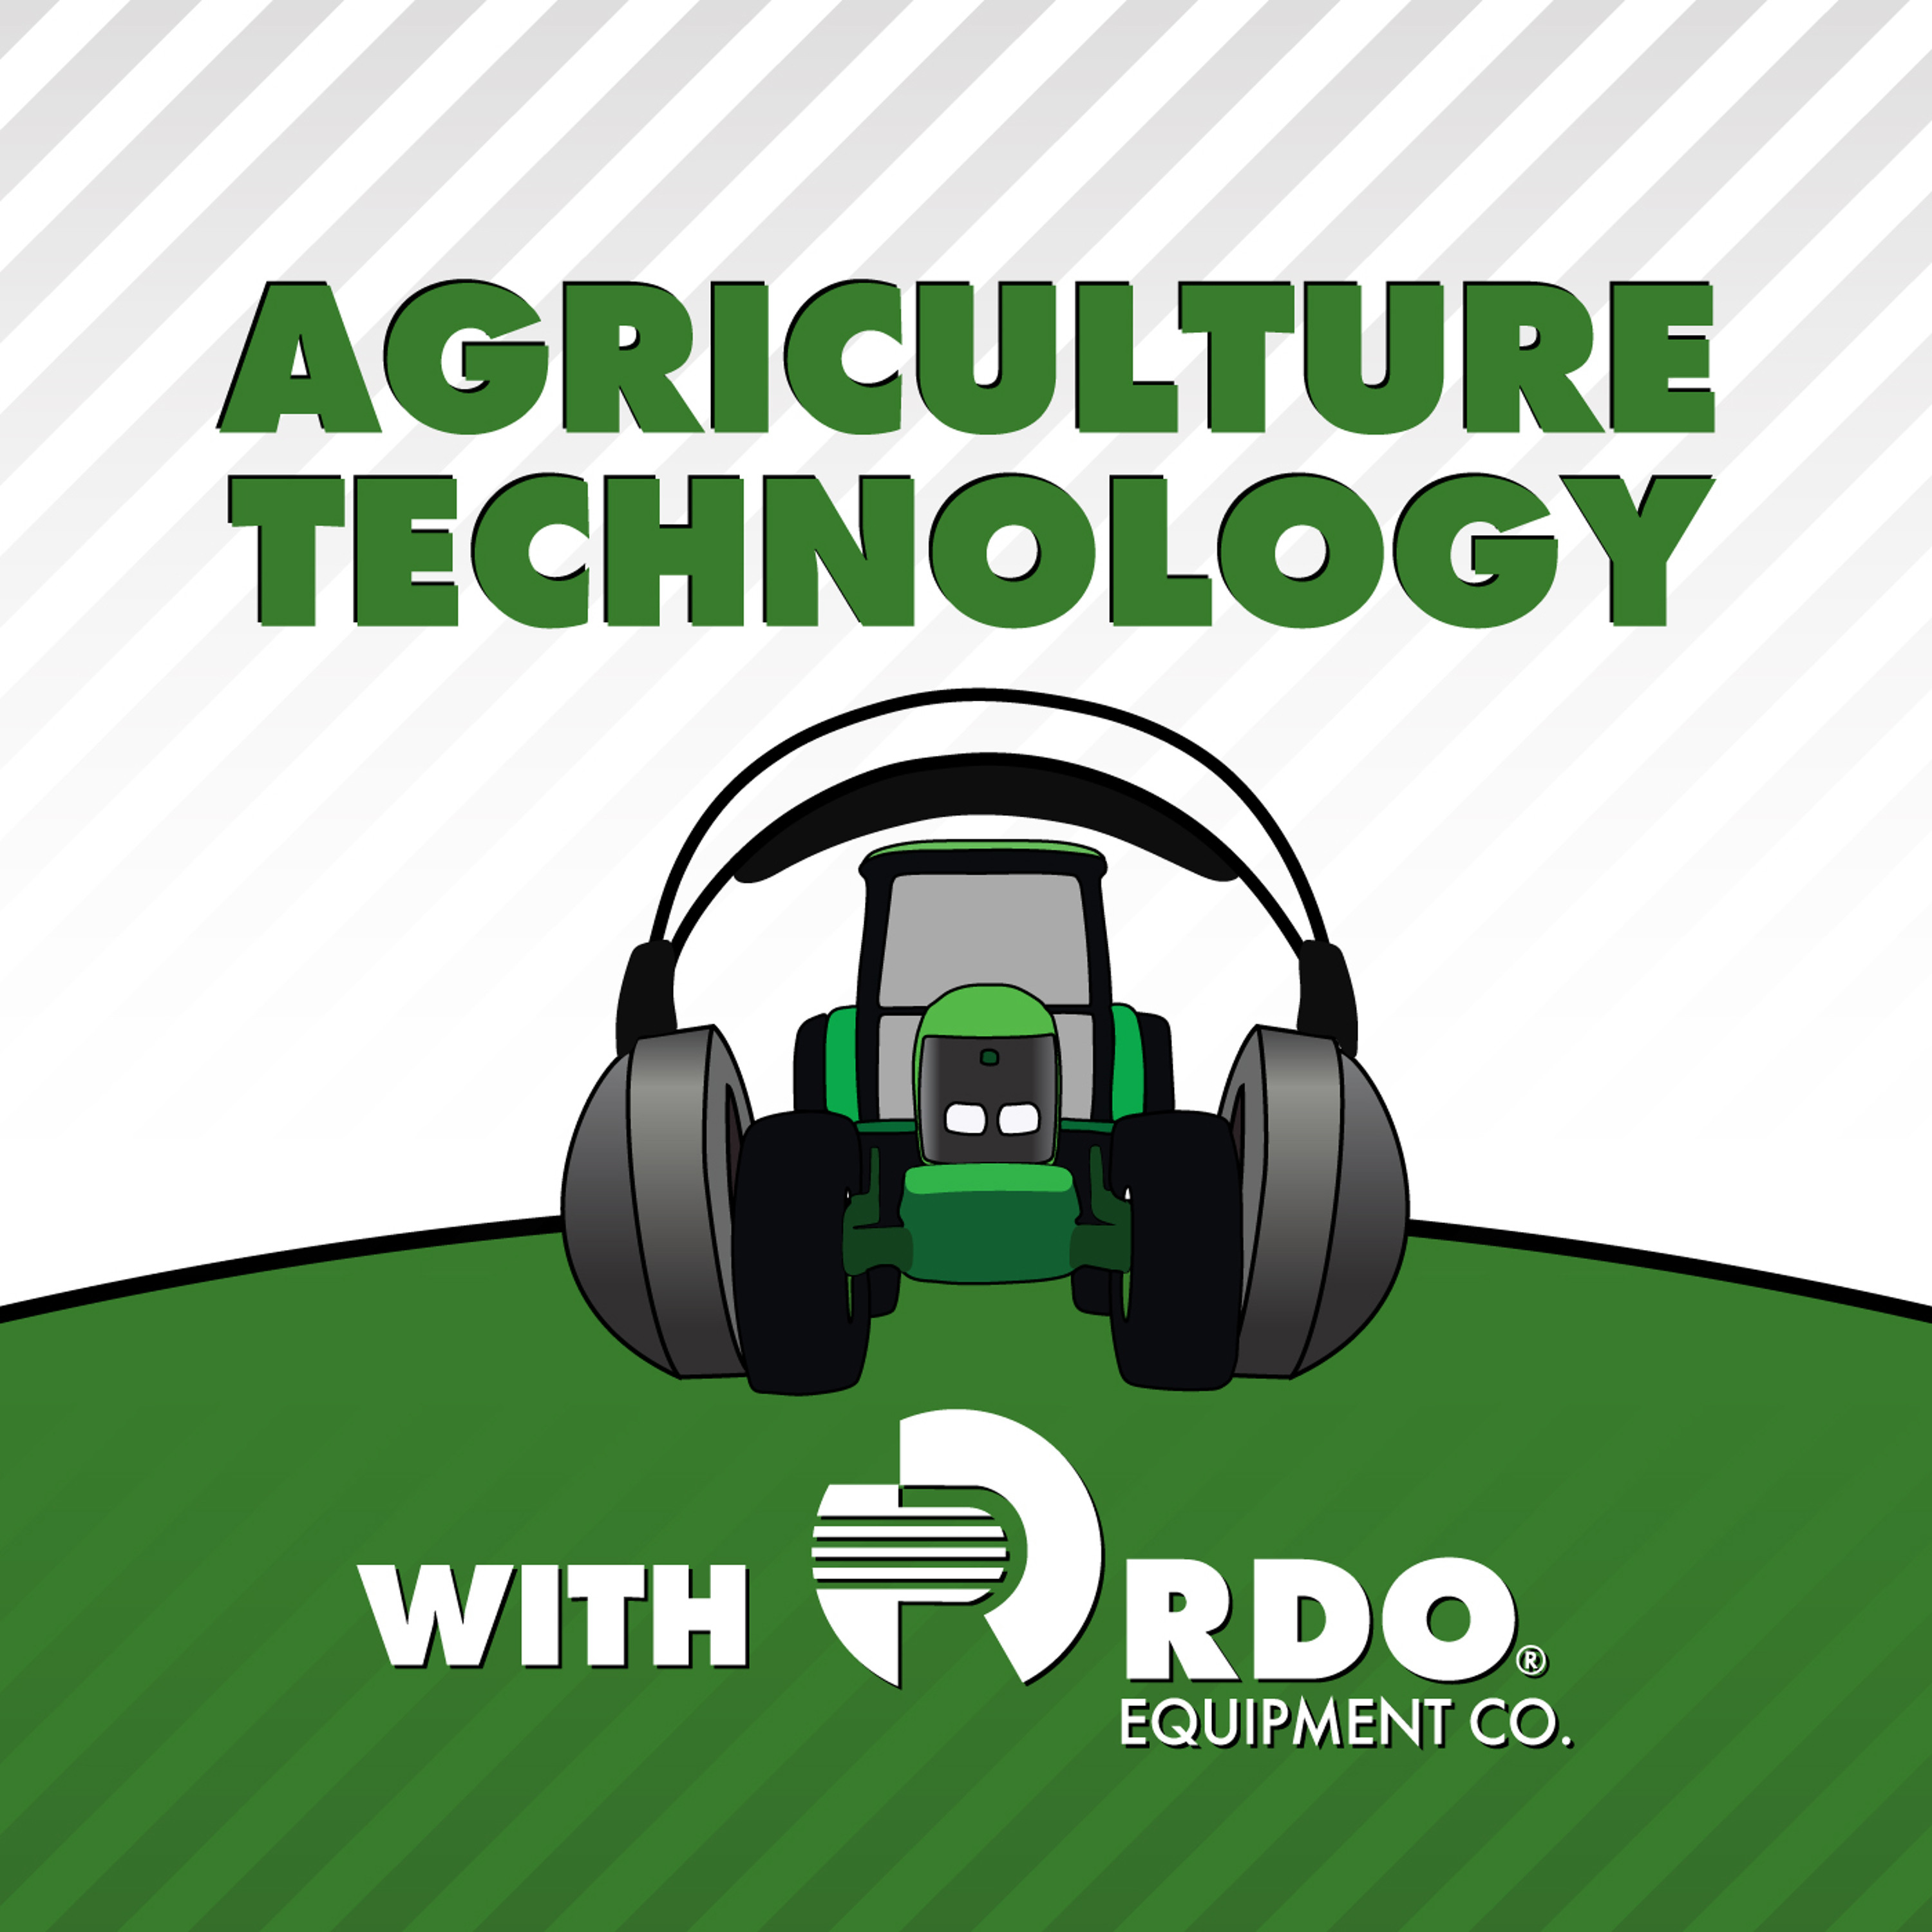 Ep. 64 The Economics Of Precision Ag With The USDA